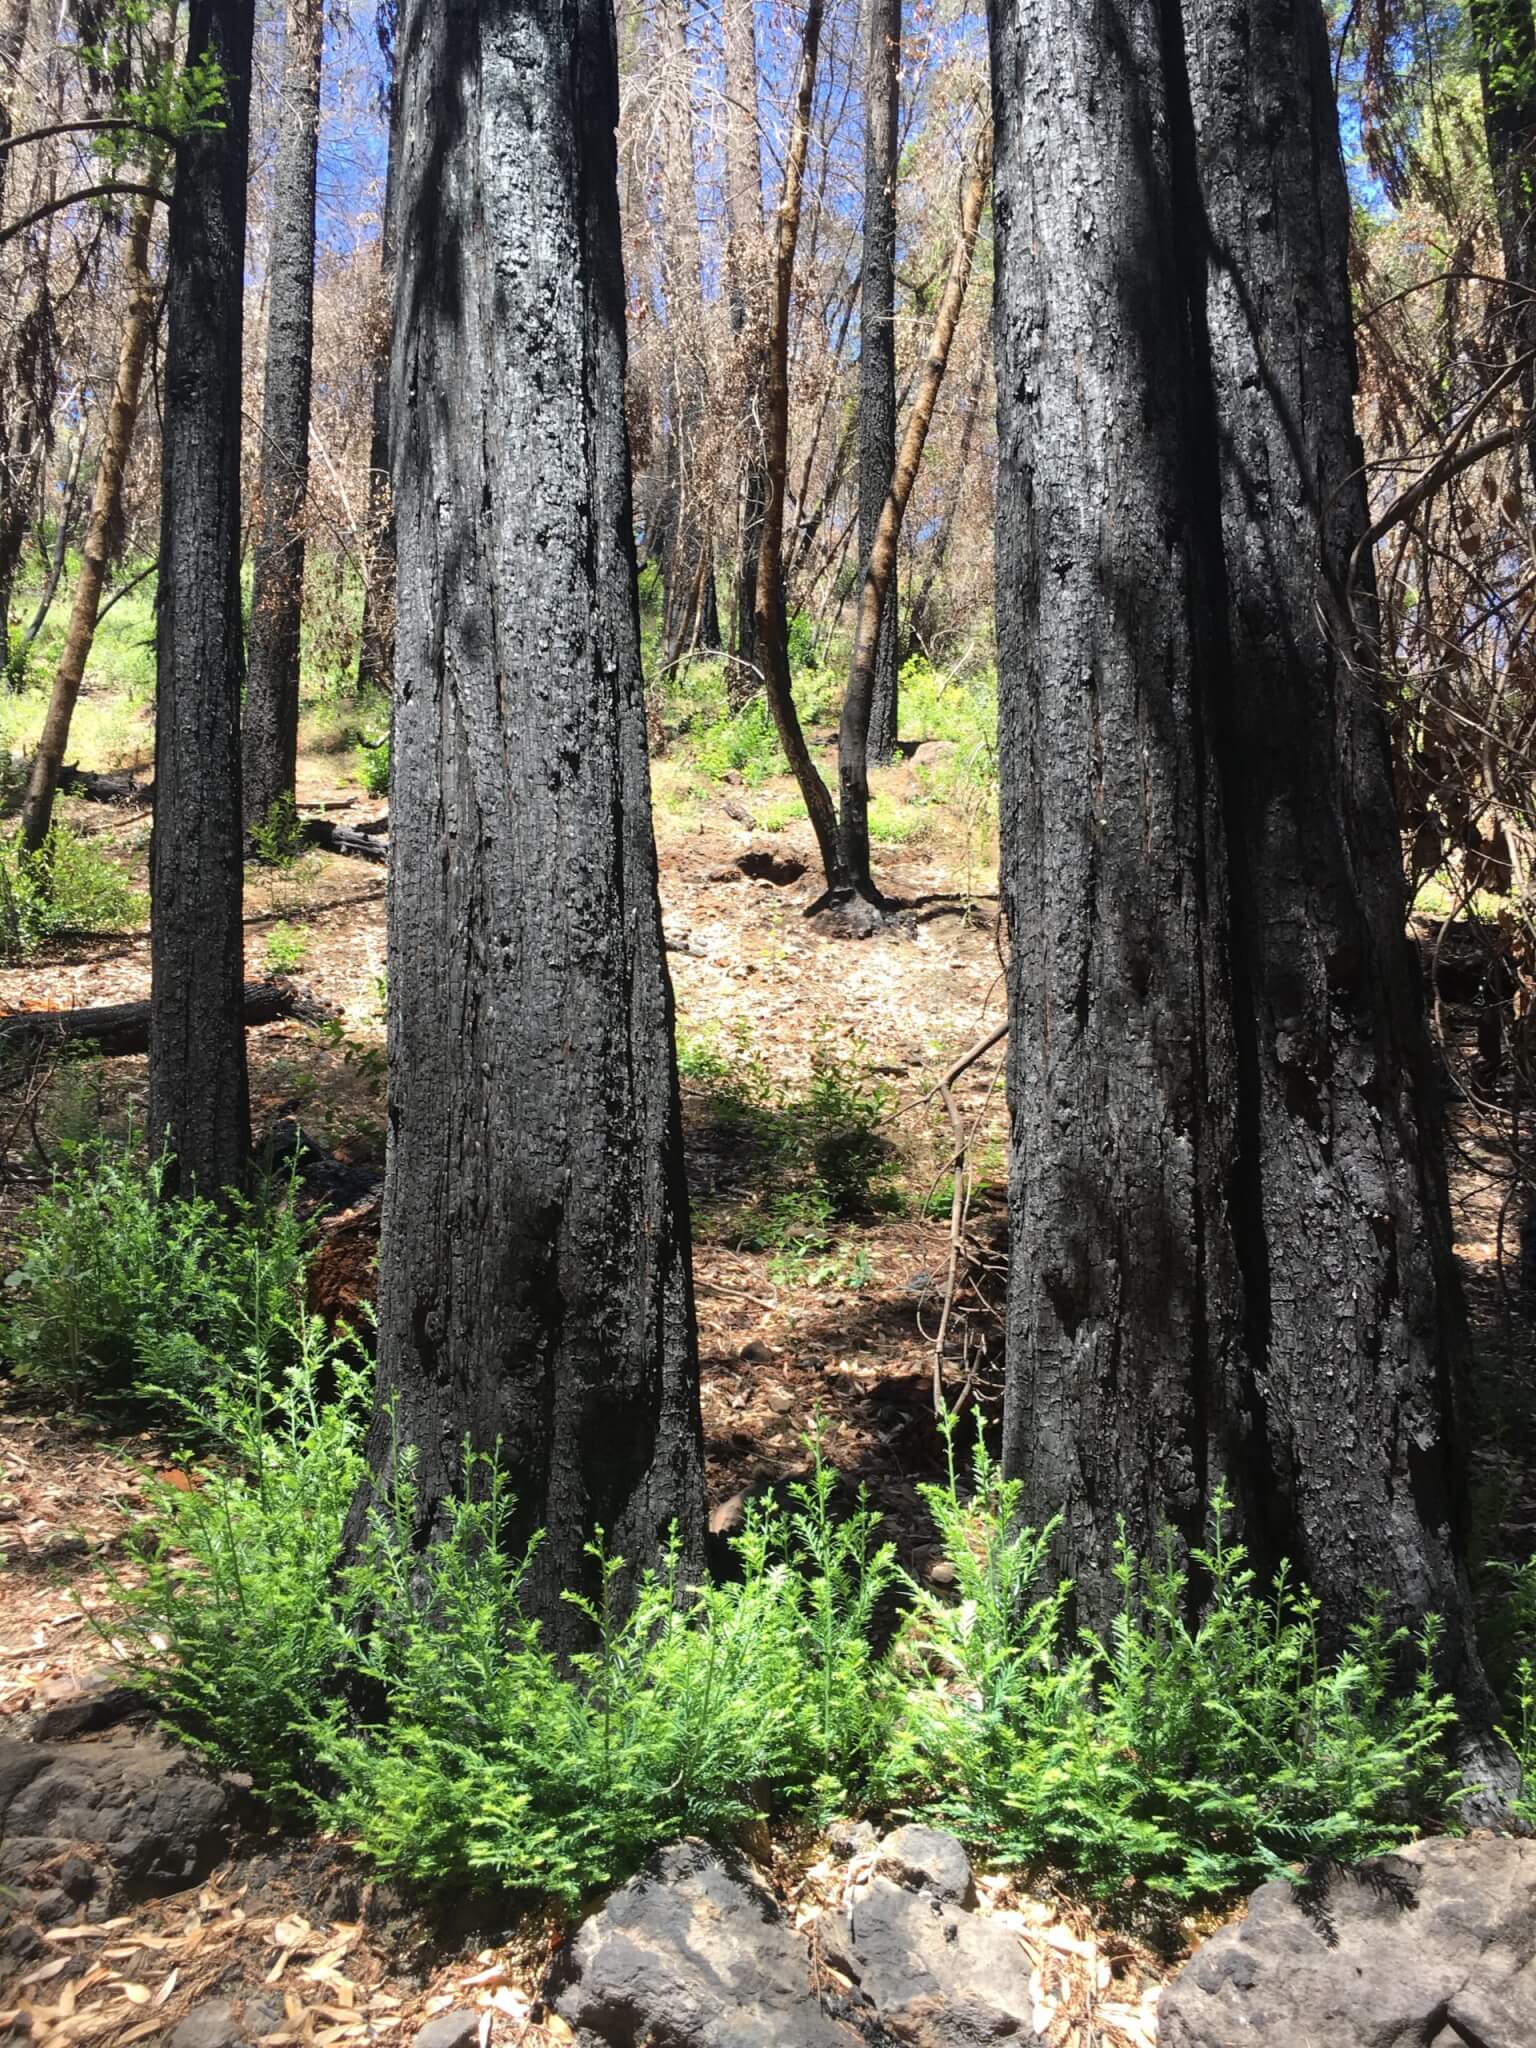 New growth sprouts from the base of burned trees.